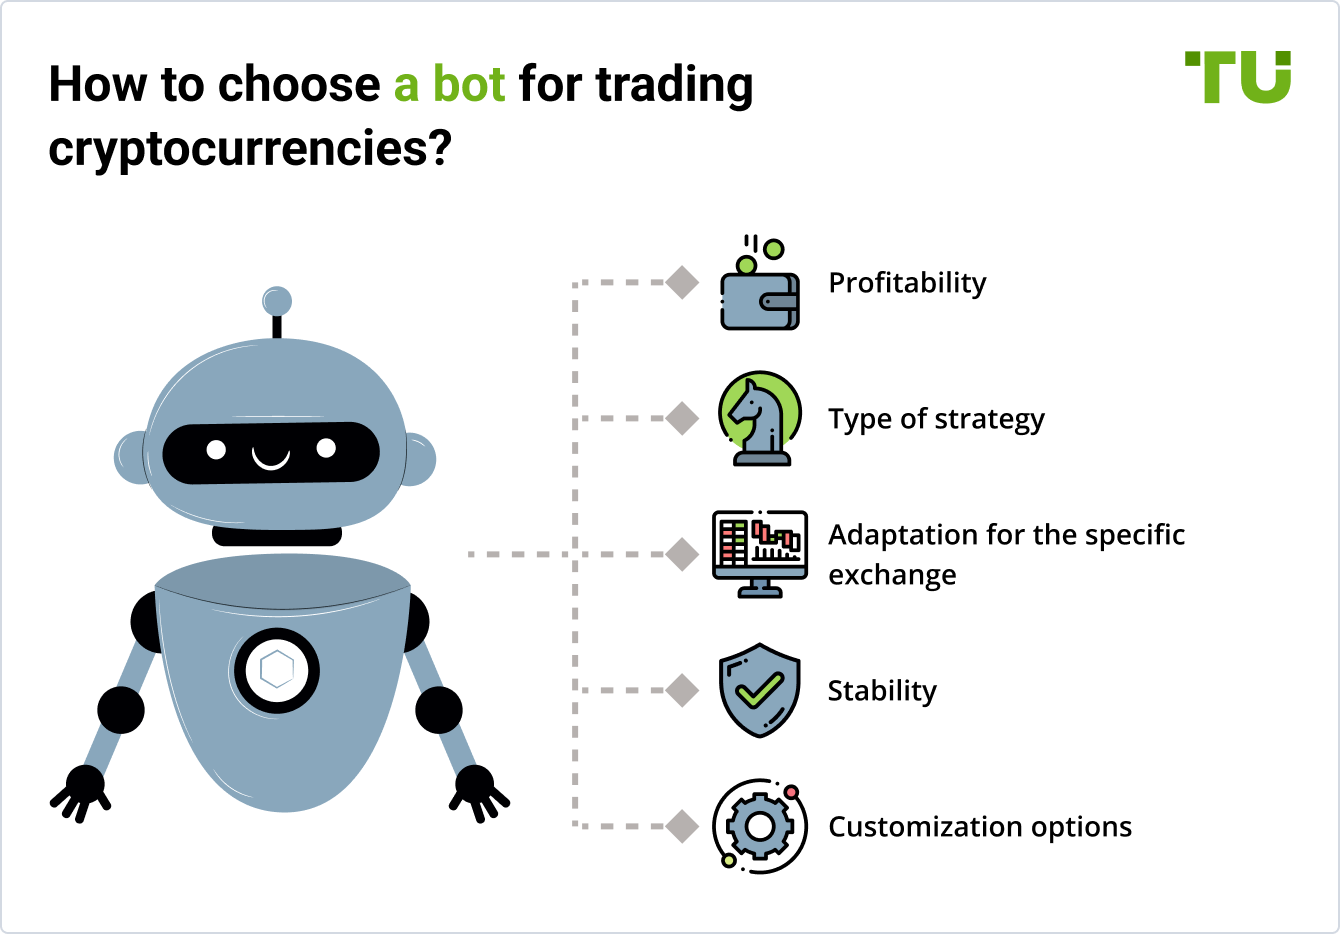 How to choose a bot for trading cryptocurrencies?